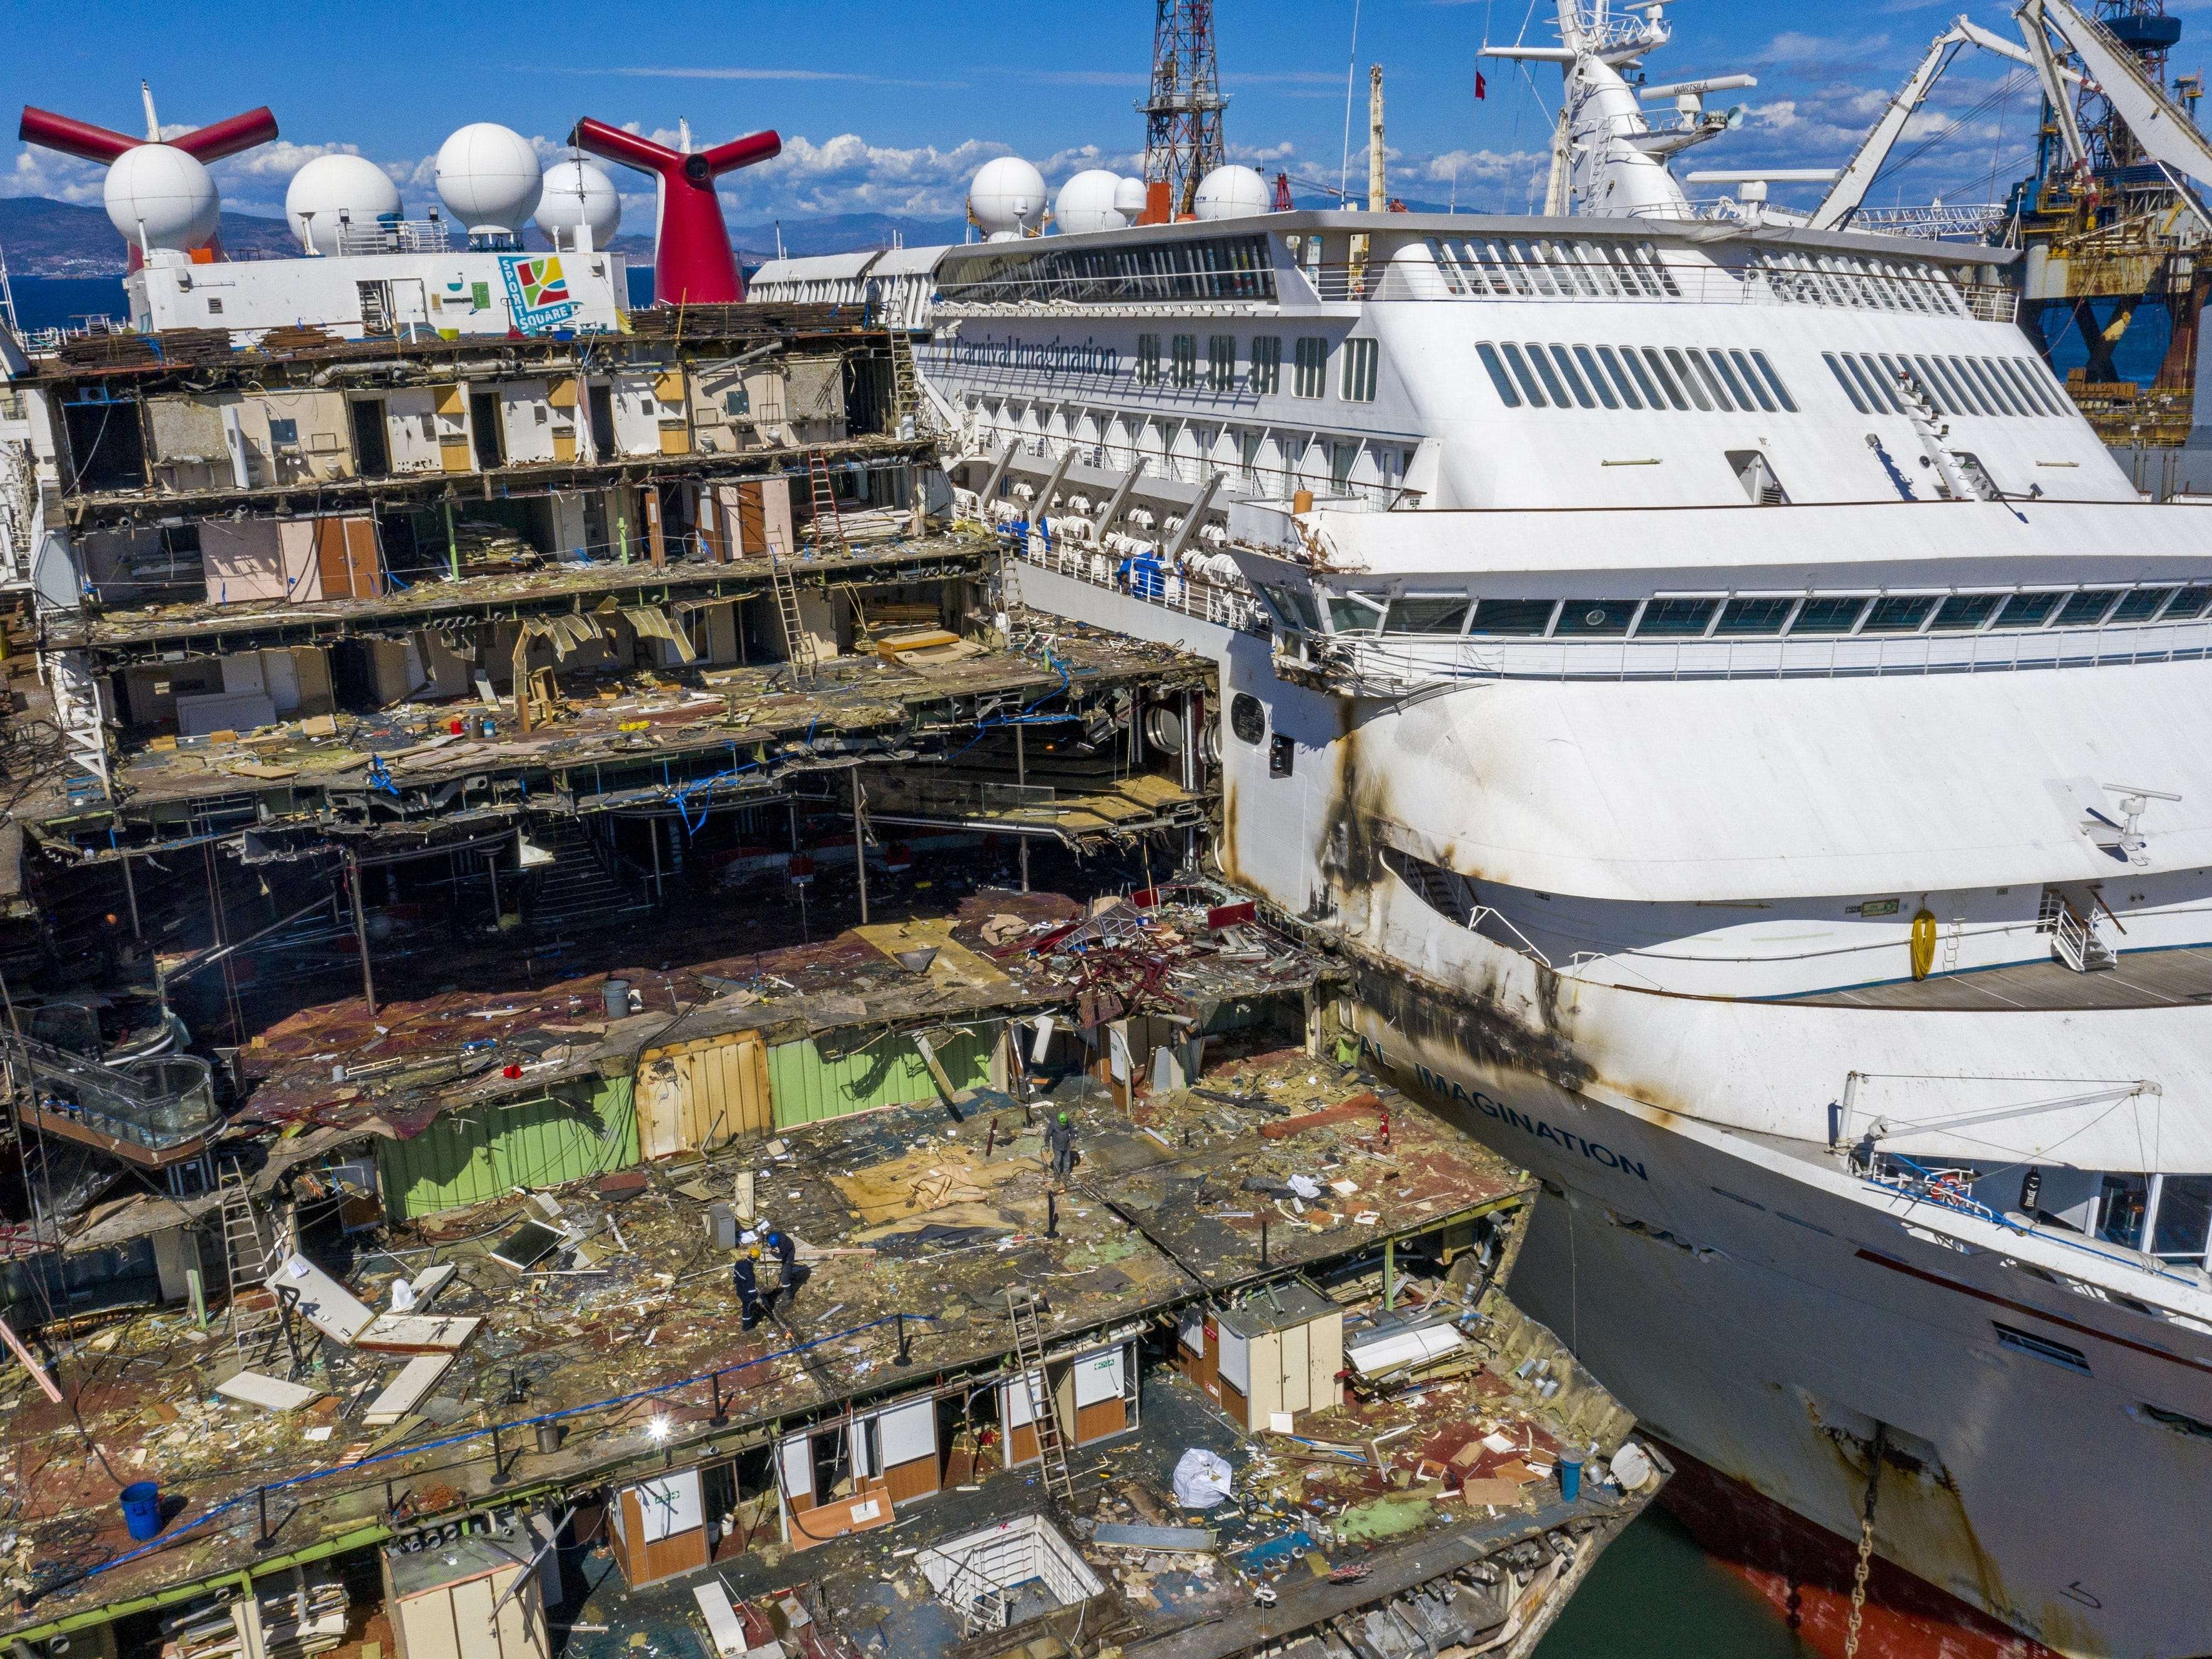 photos-of-abandoned-stripped-cruise-ships-show-how-deeply-the-cruise